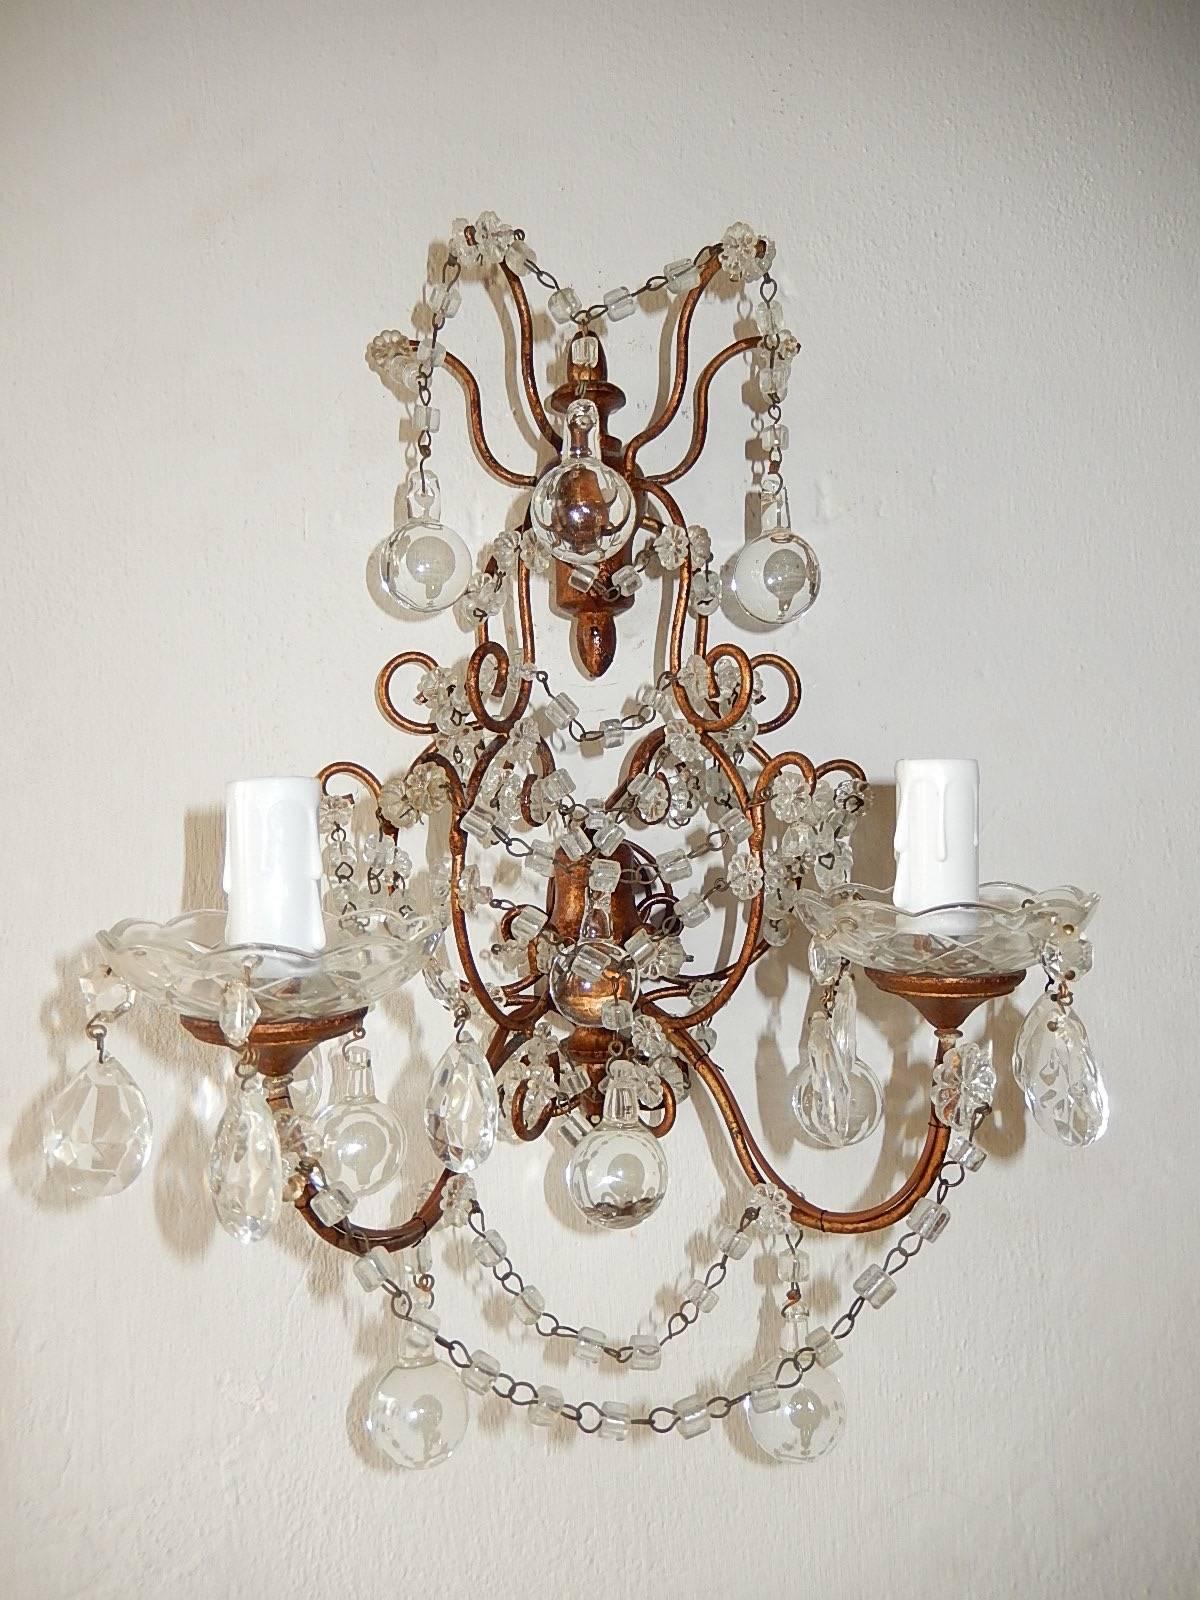 Housing two lights each. Crystal macaroni swags with clear Murano balls. Giltwood on back and under crystal bobeches. Re-wired and ready to hang. Free priority shipping from Italy.